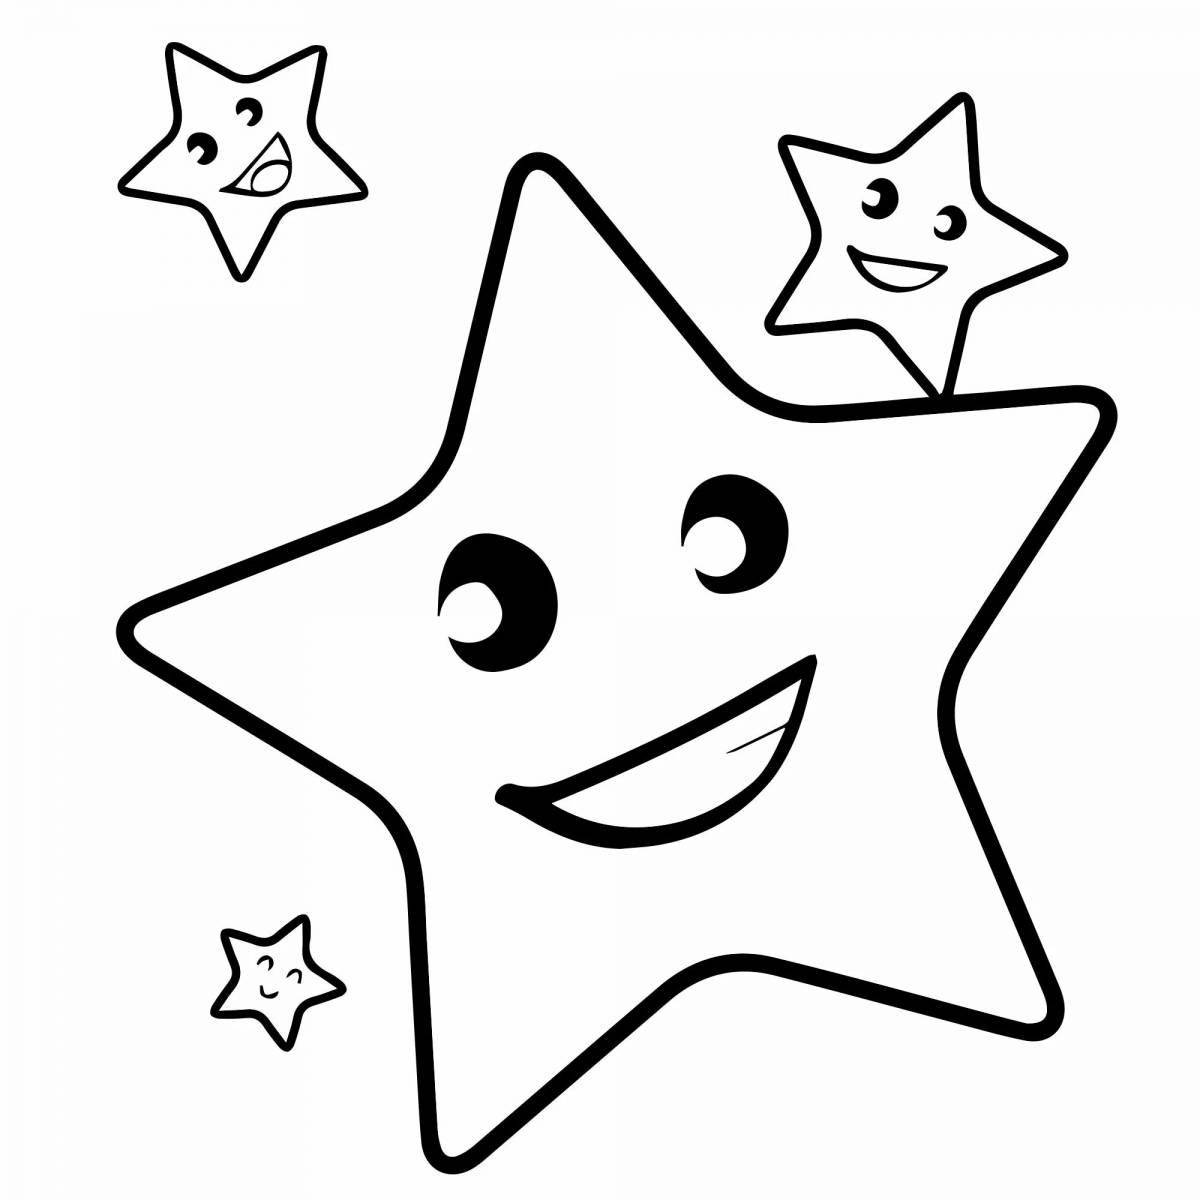 Sparkle coloring picture star pattern